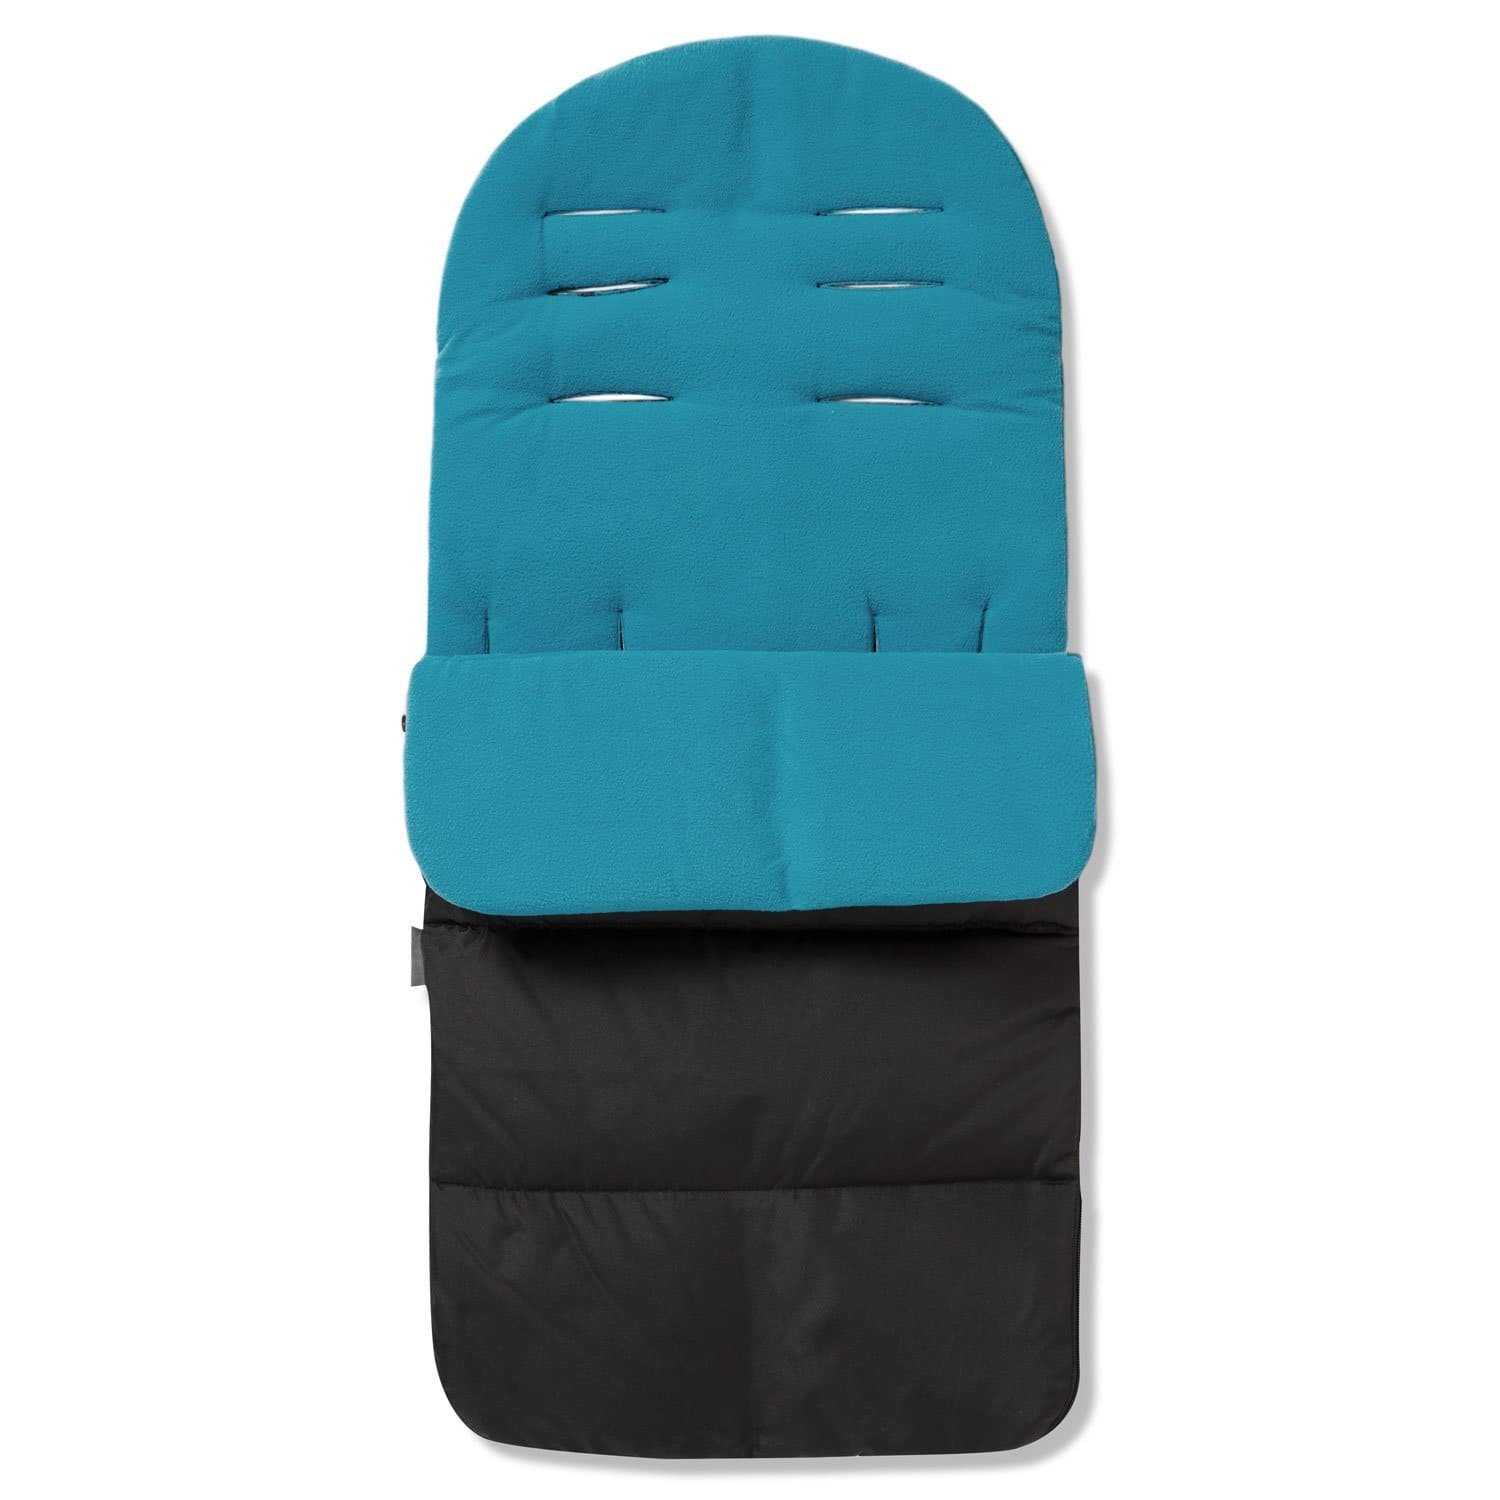 Premium Footmuff / Cosy Toes Compatible with Peg Perego - Ocean Blue / Fits All Models | For Your Little One